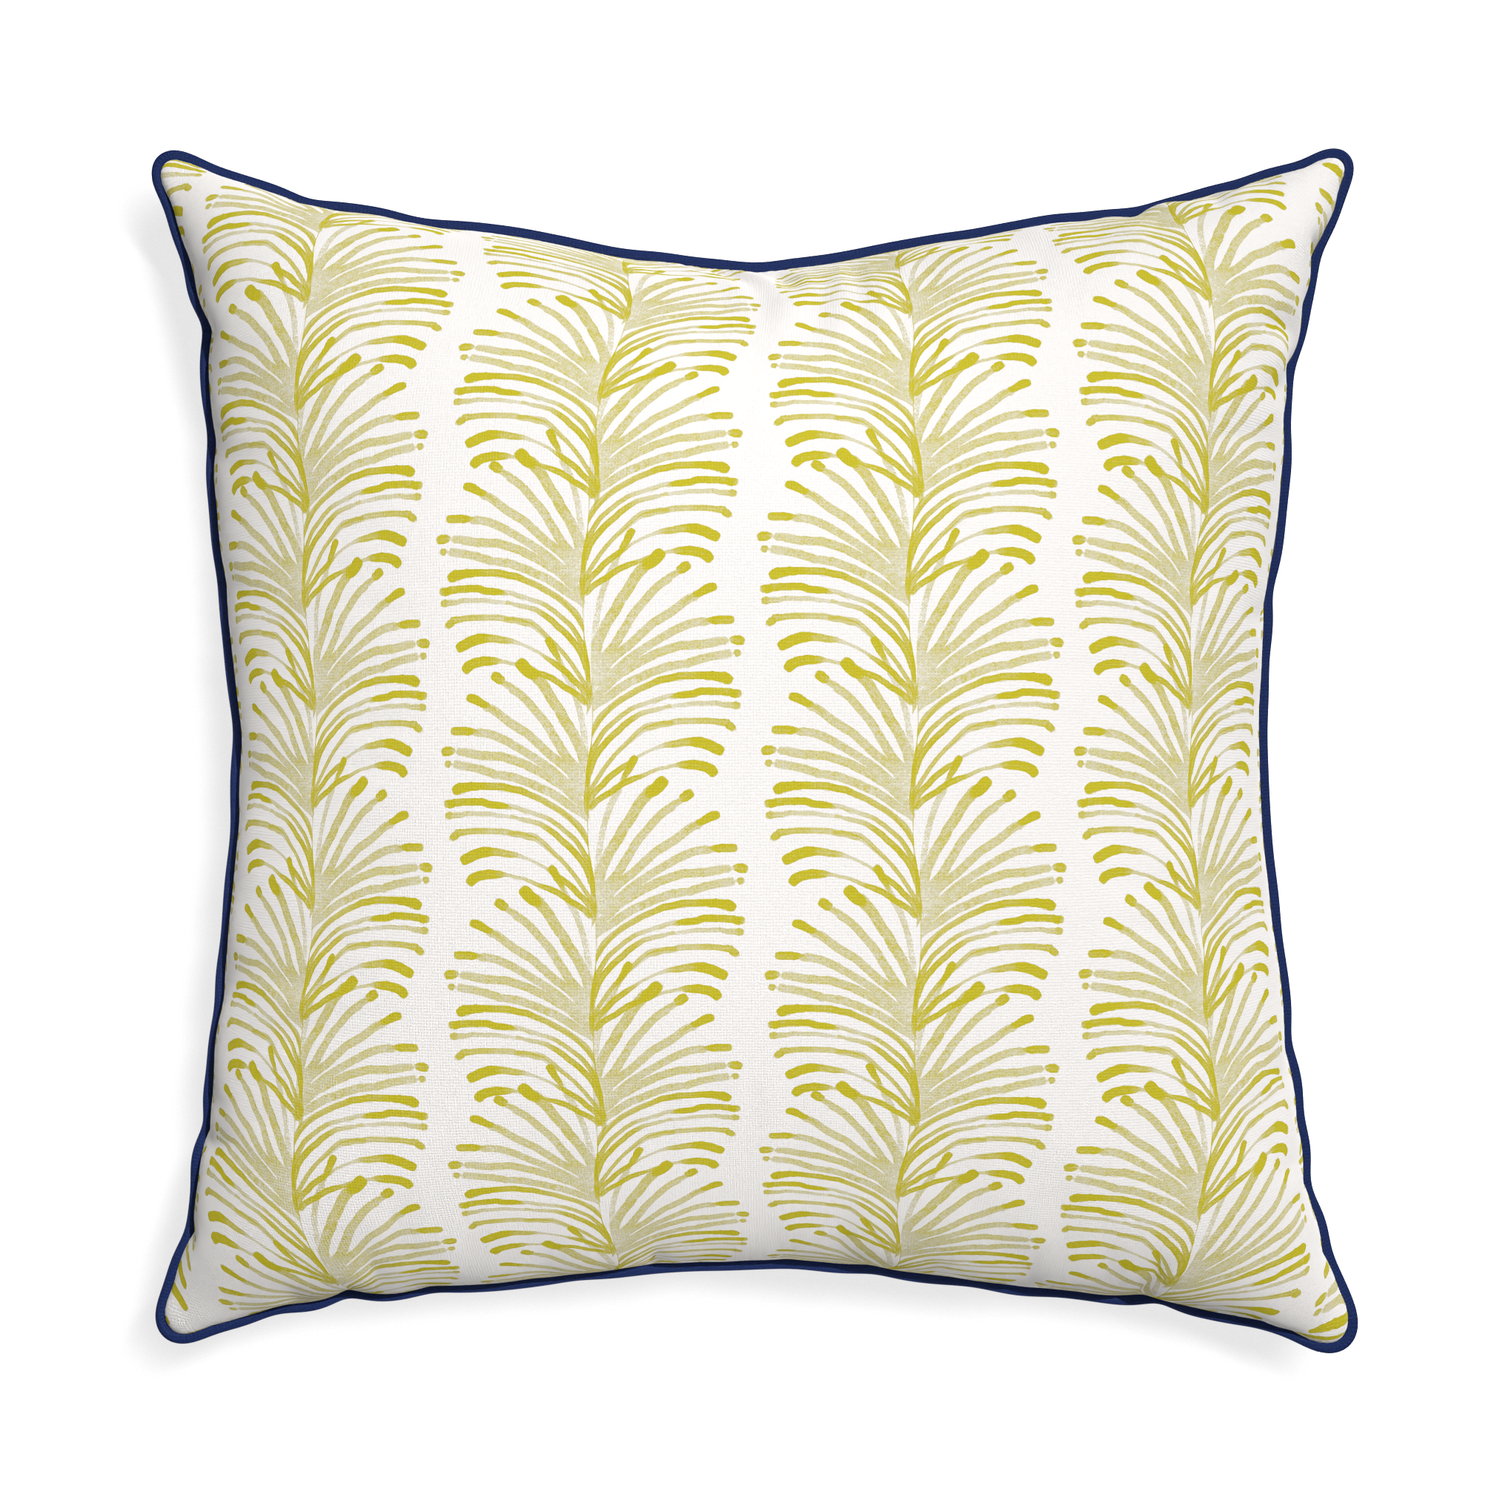 Euro-sham emma chartreuse custom yellow stripe chartreusepillow with midnight piping on white background